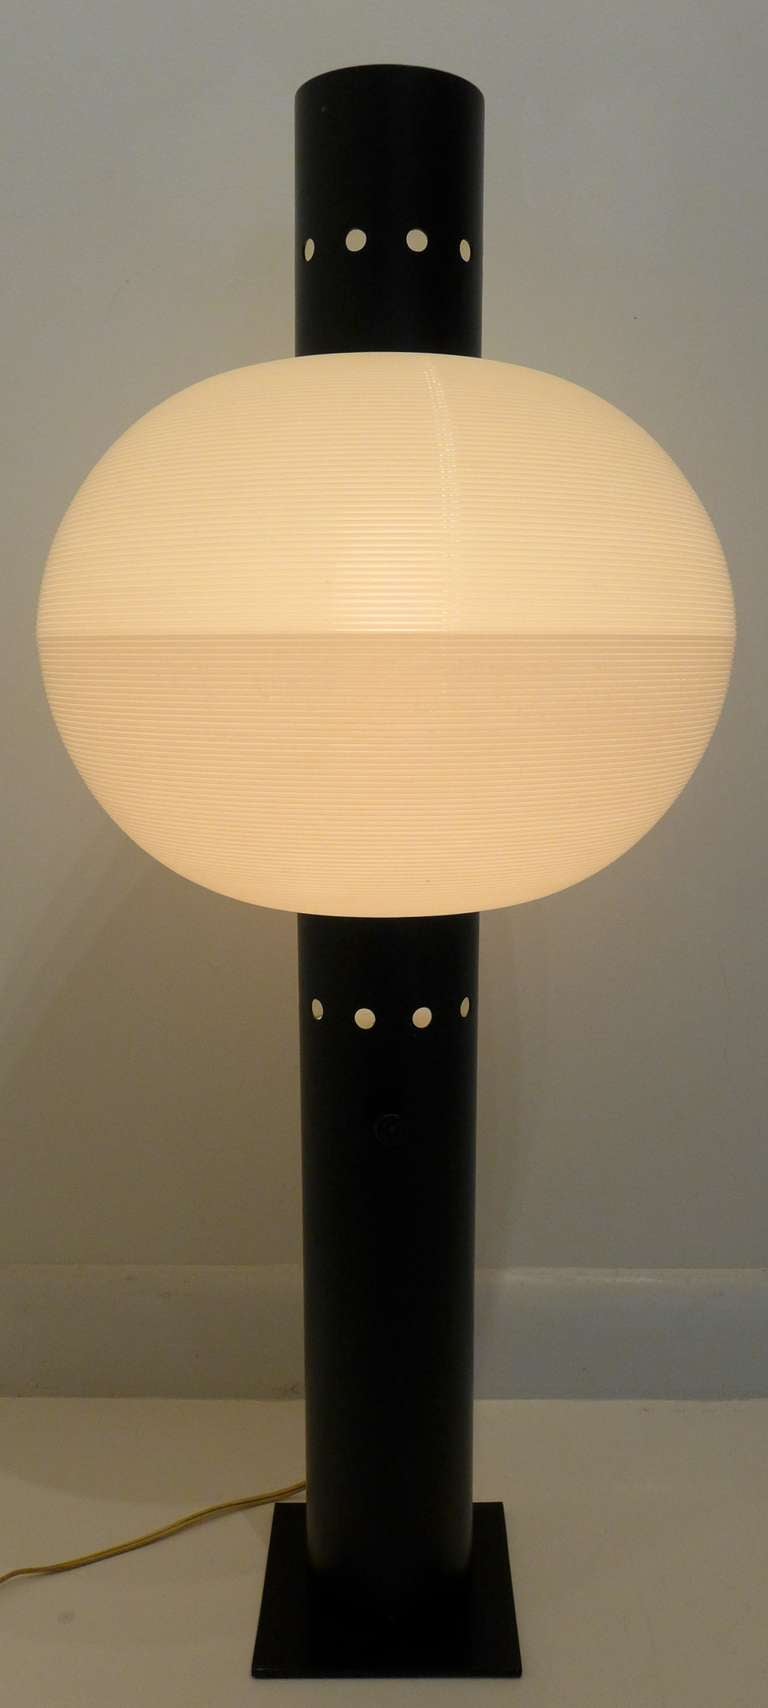 Table lamp consisting of an oval Rotaflex globe and a two-piece cylindrical column with perforations. Manufactured by Heifetz as model T-13, circa 1954.
A rare Heifetz design in excellent original condition. Probably of American origin, but